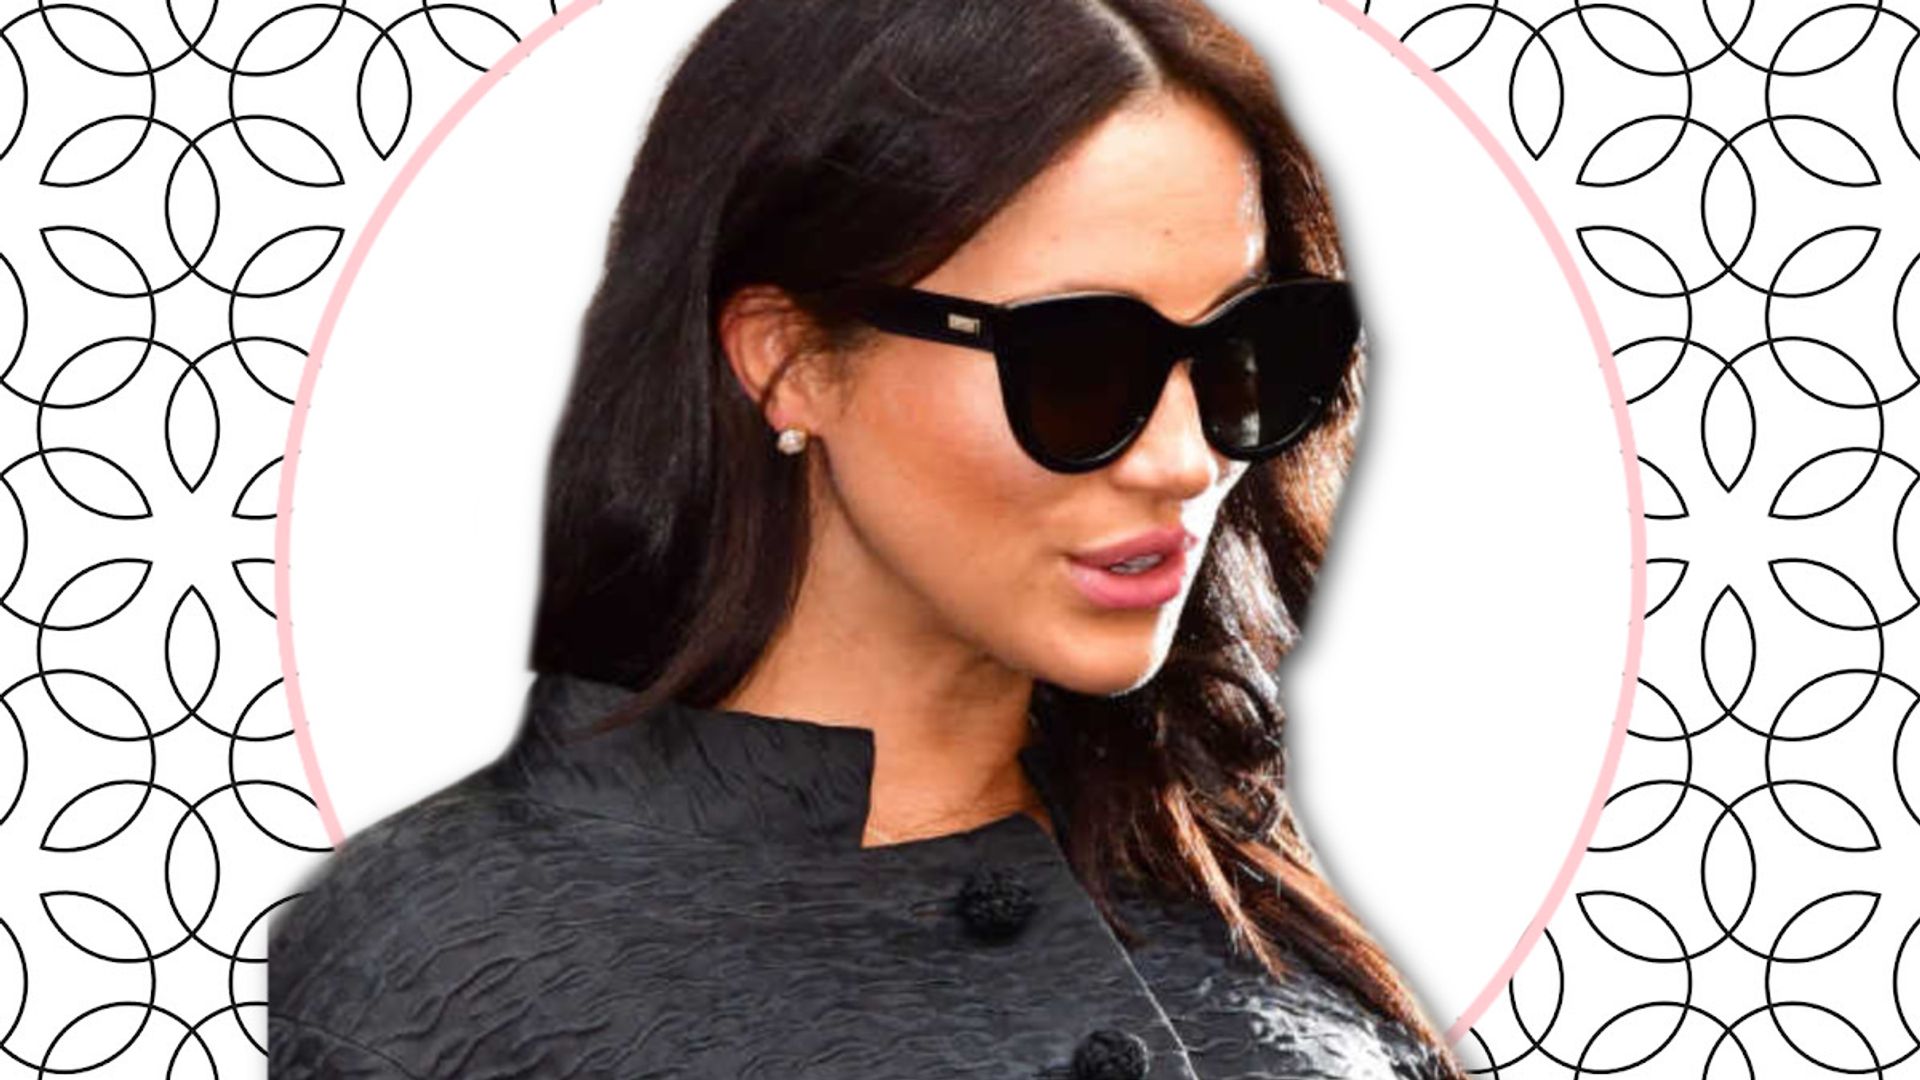 Celine Cat Eye Sunglasses Style & Review (As seen on Beyonce